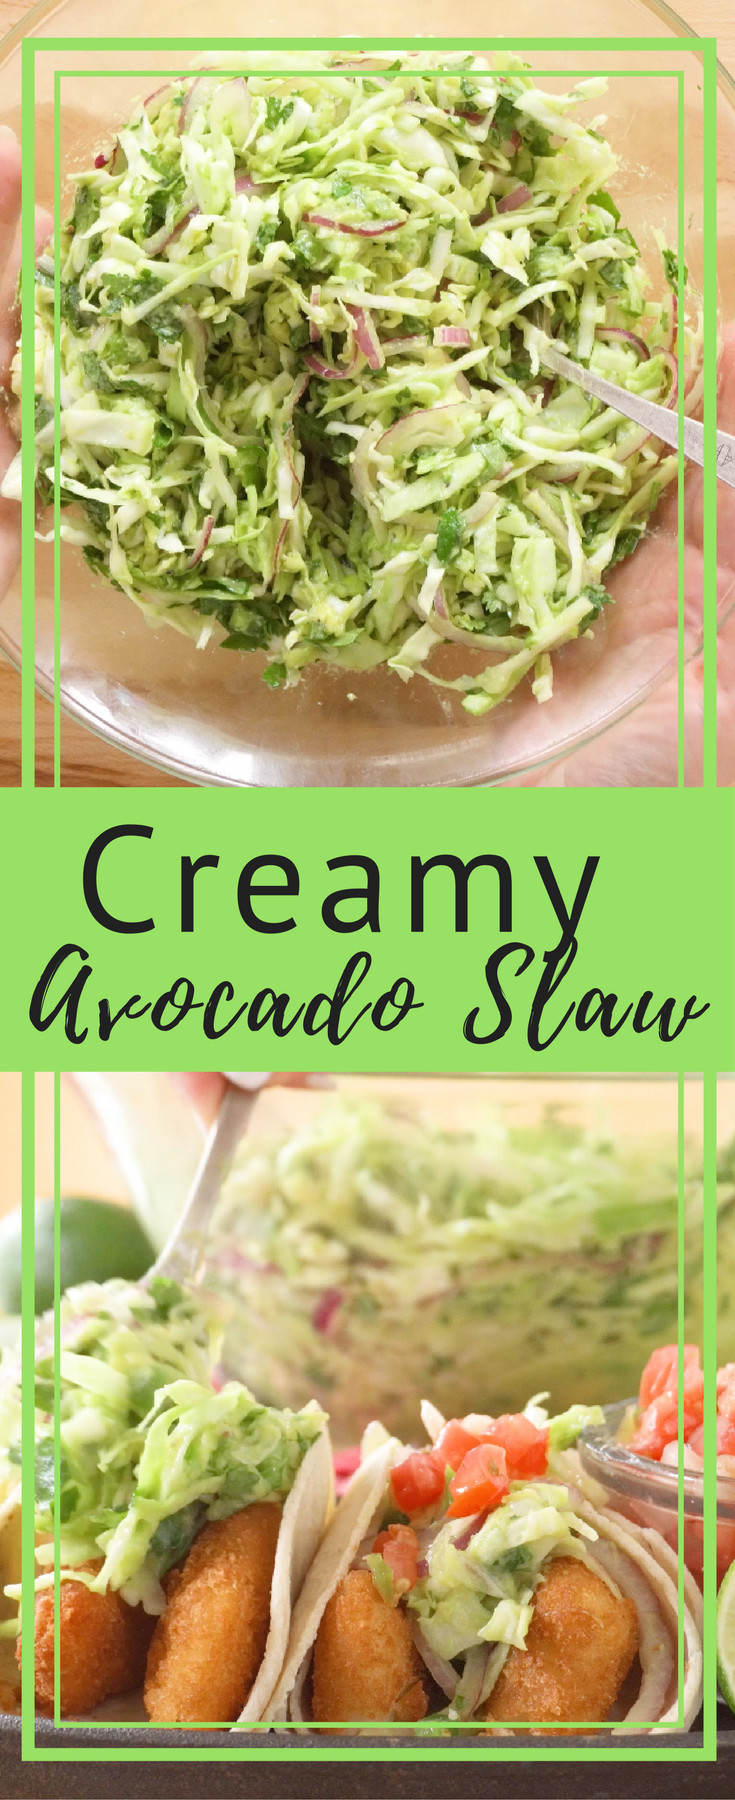 Side Dishes For Fish Tacos
 Creamy Avocado Slaw Recipe in 2020